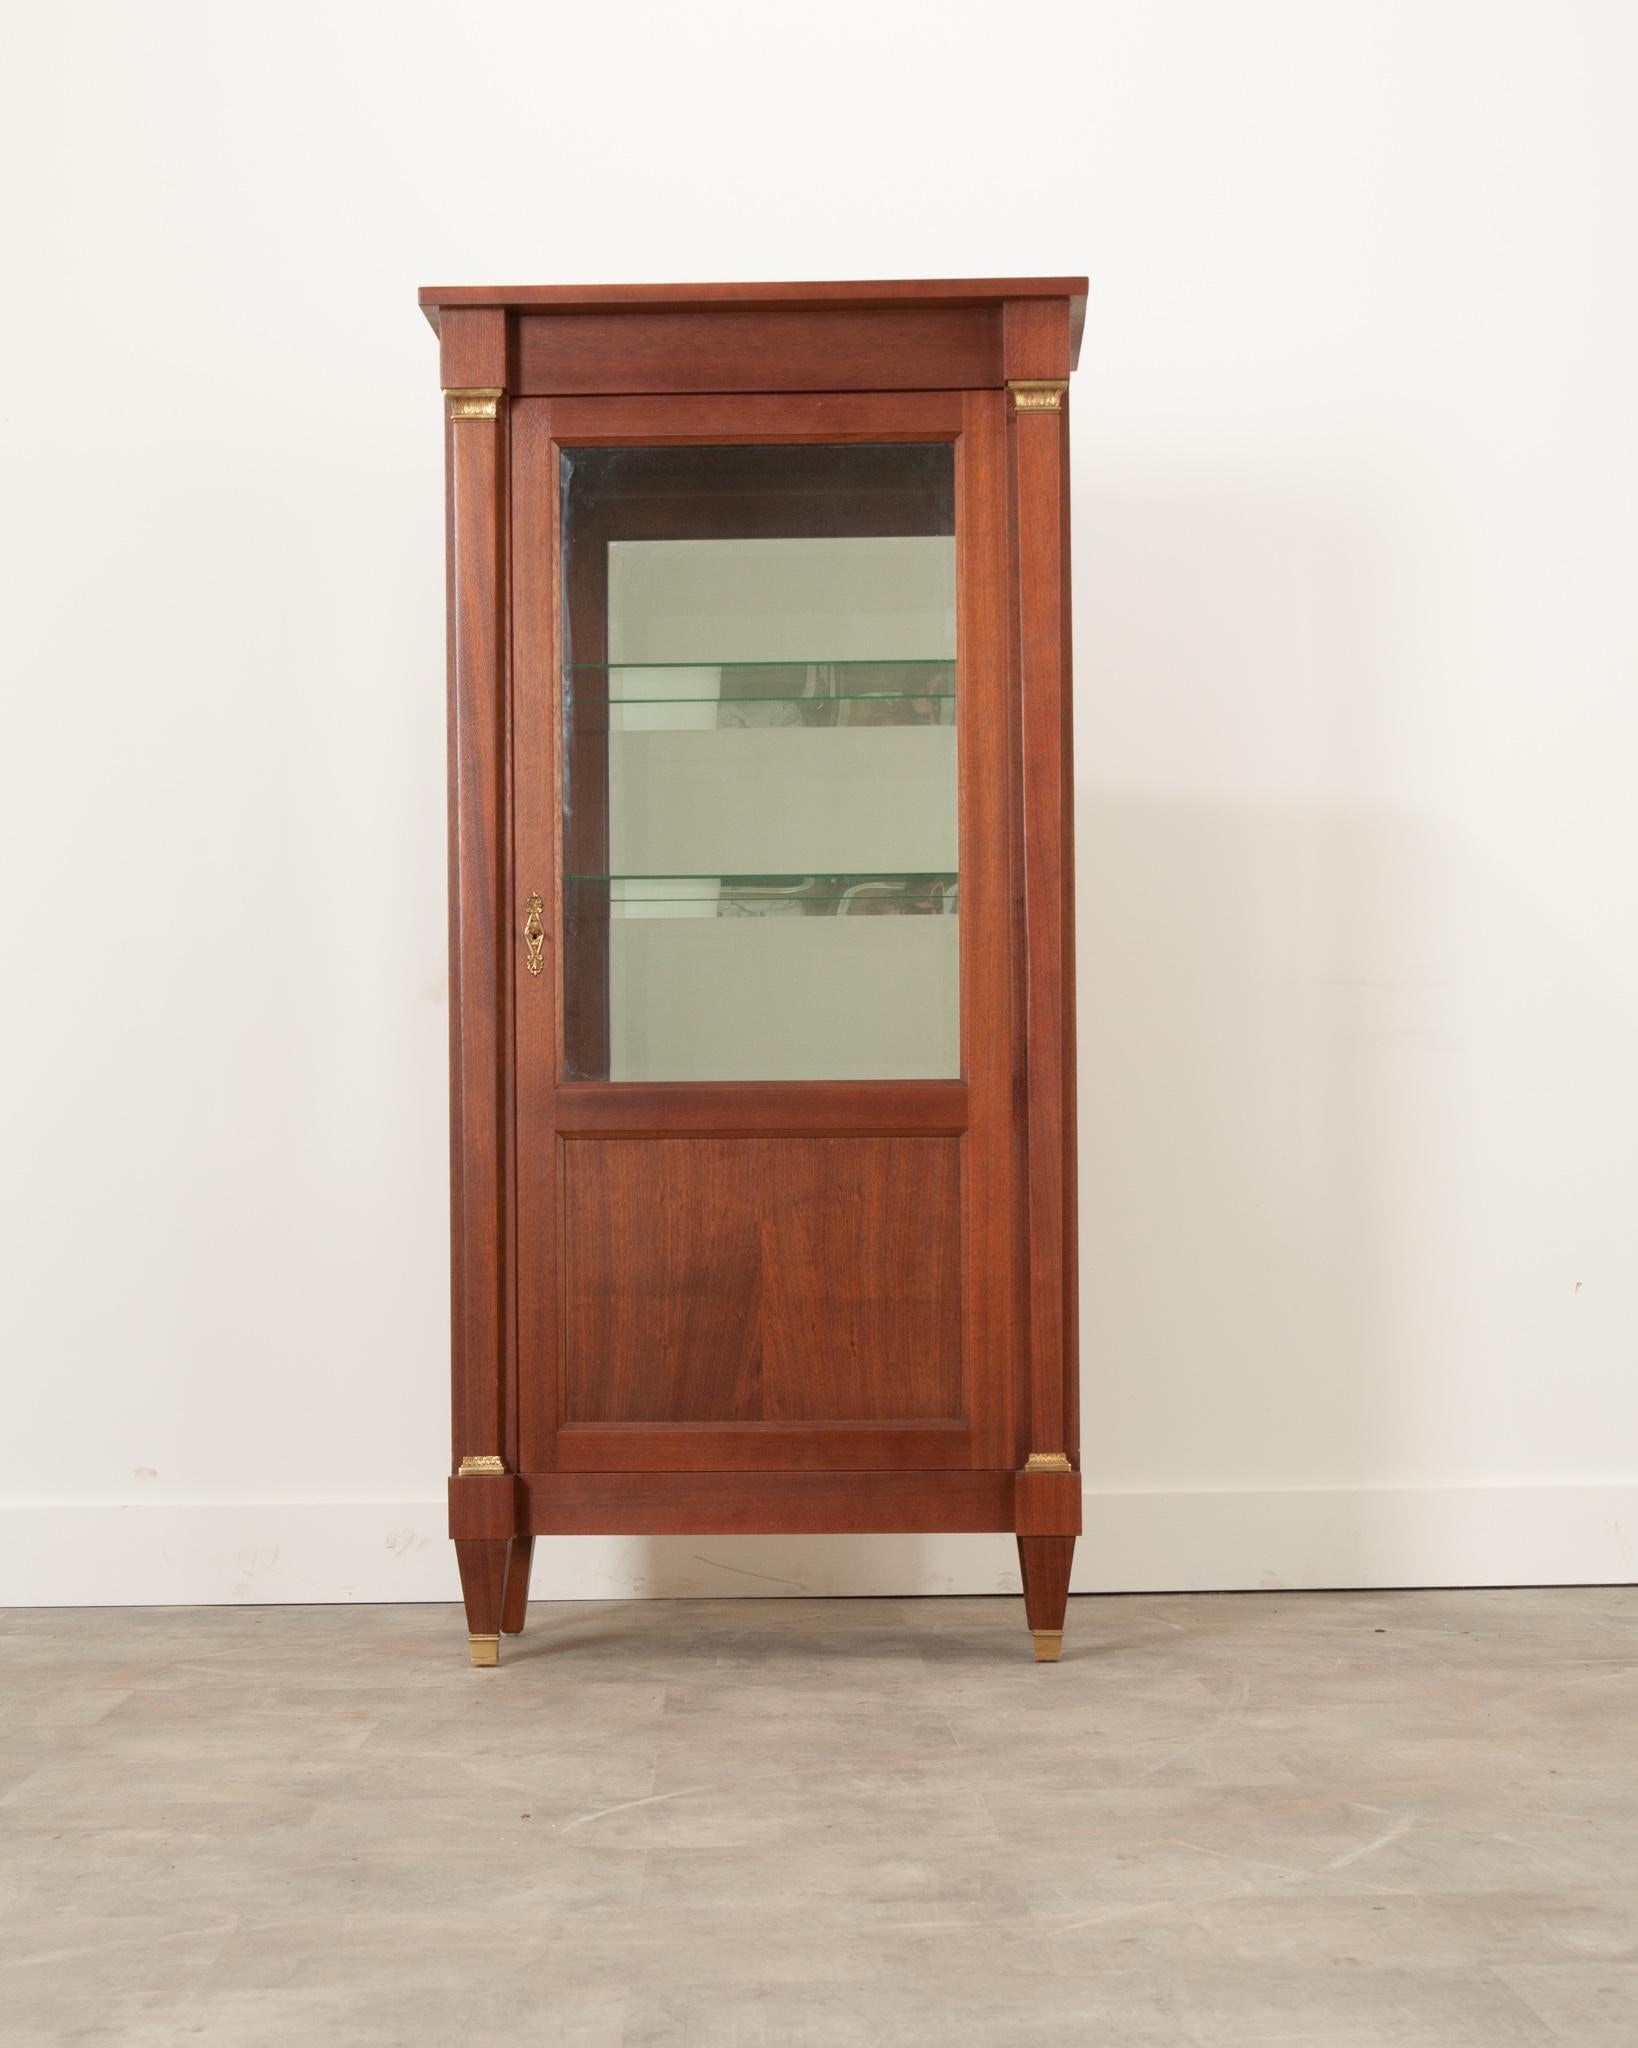 Display your treasured objects in this beautiful early 20th century French Empire style mahogany vitrine. Beveled glass panels can be found in the case antique’s door and sides, allowing one to view the contents placed inside on its two glass